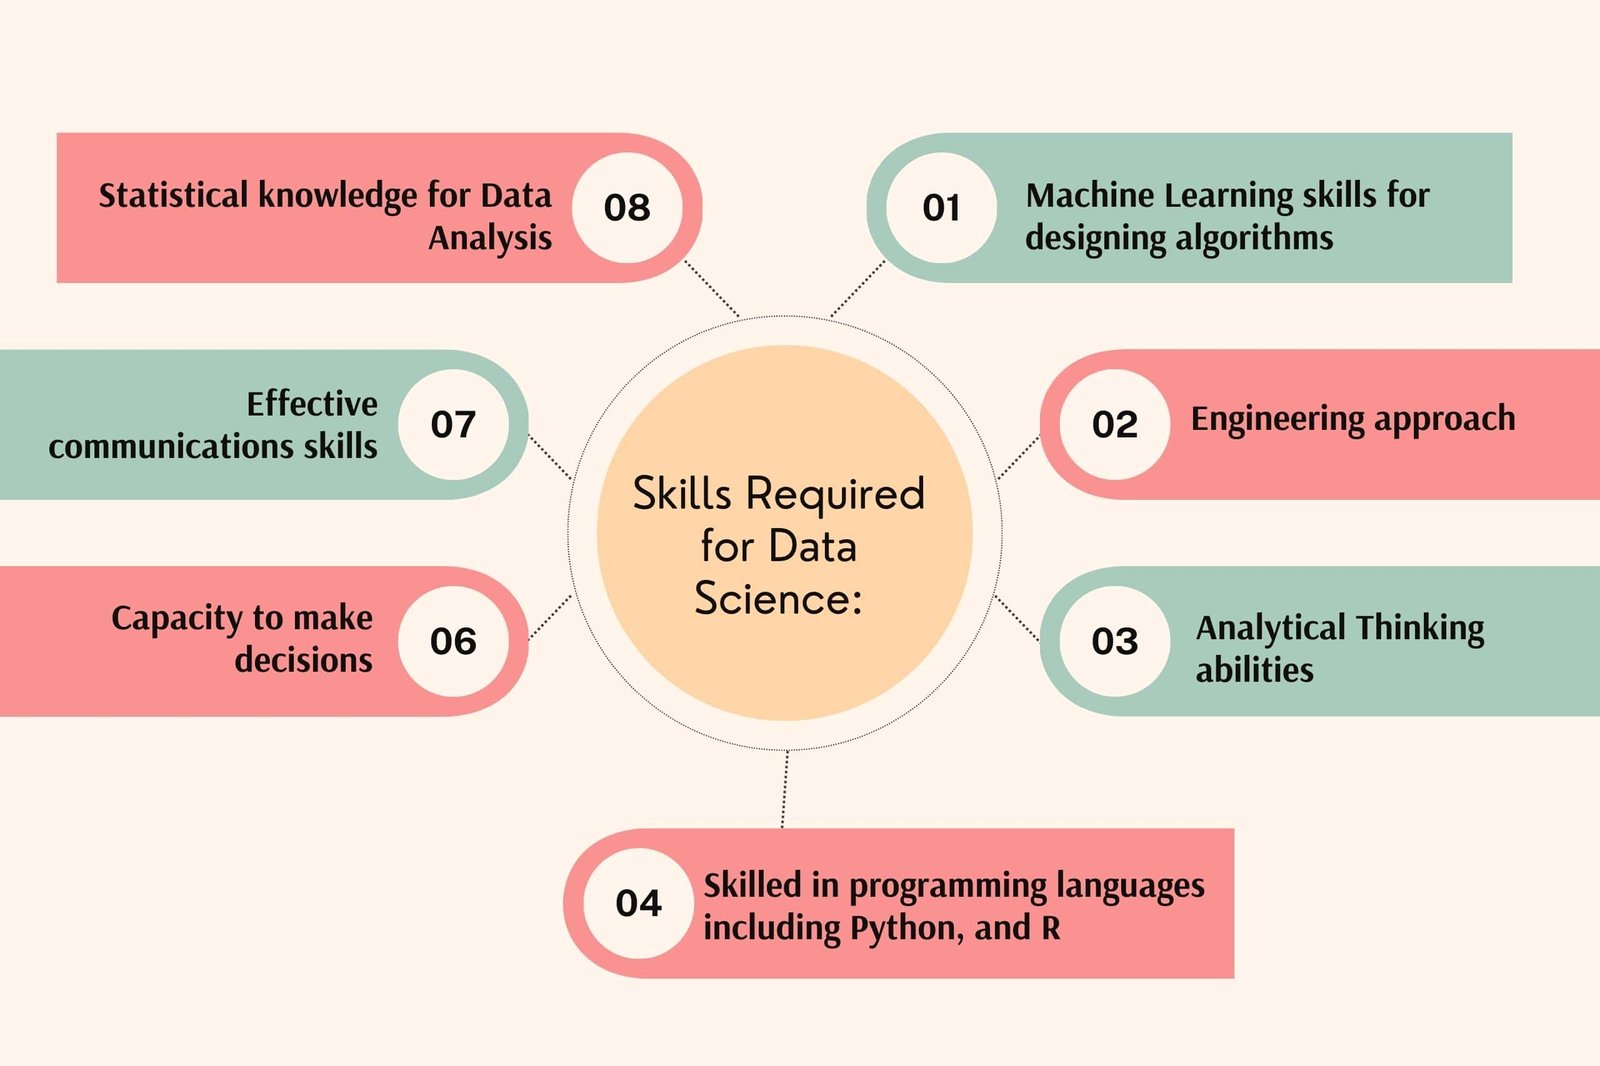 Skills Required for Data Science